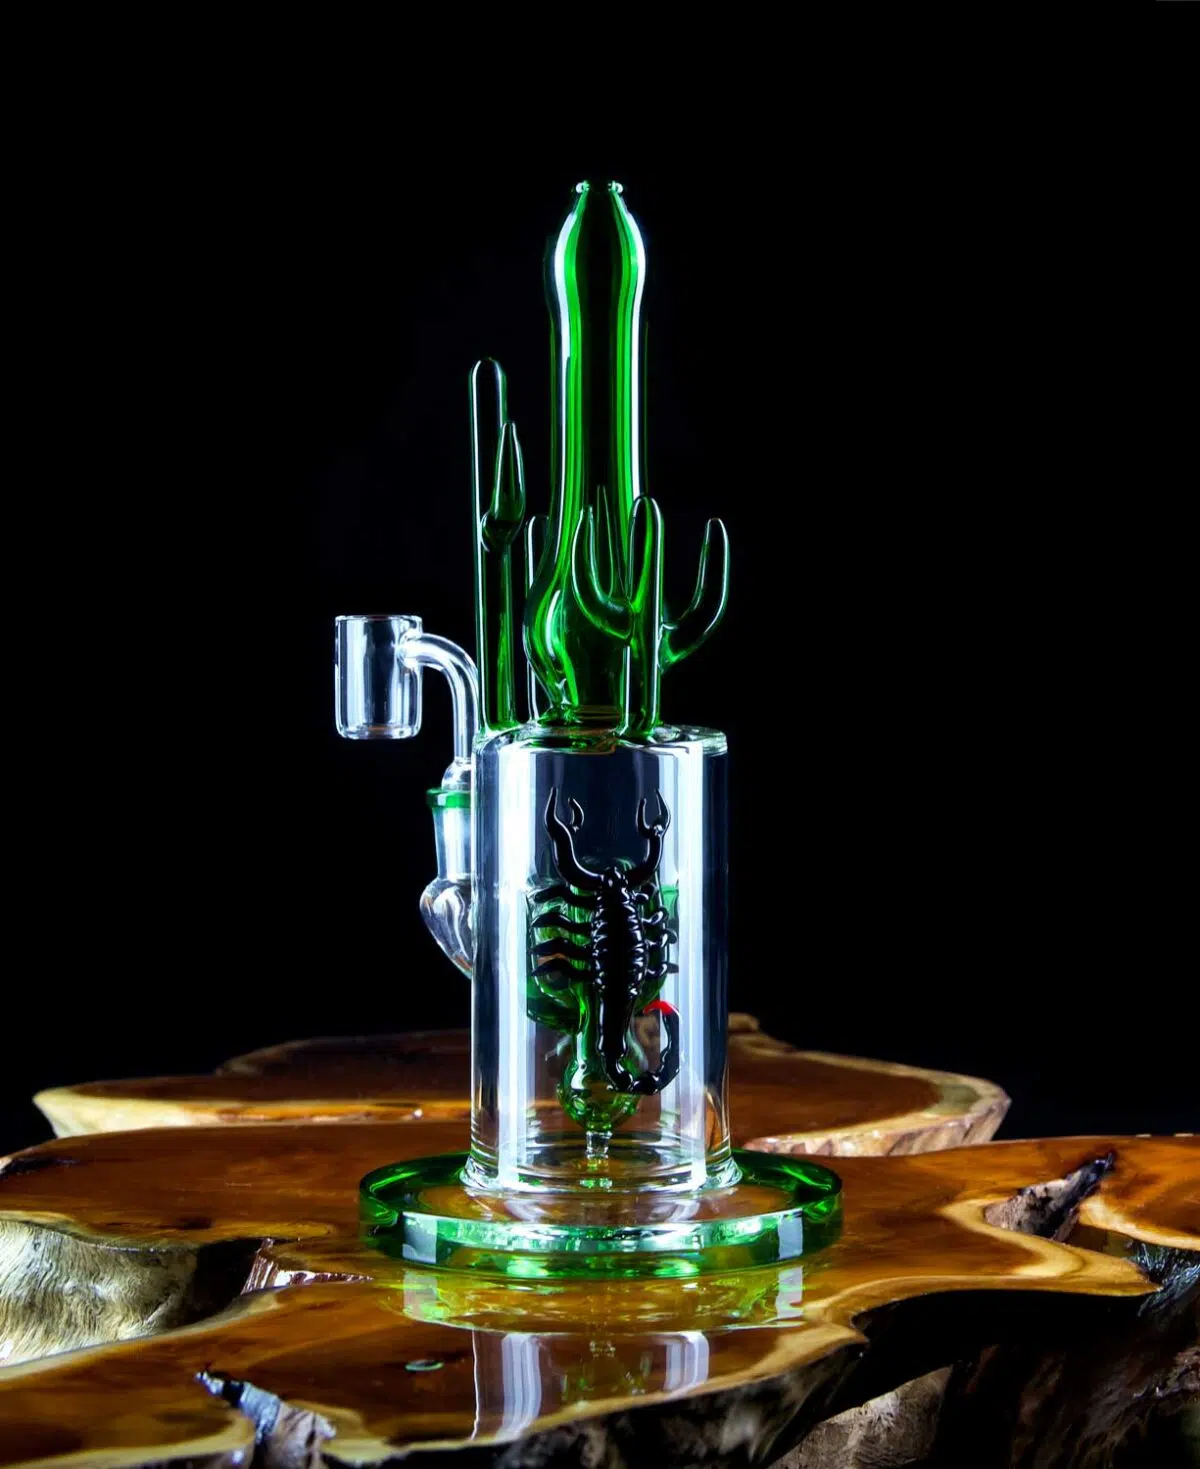 cactus dab rig with scorpion perc on wooden table